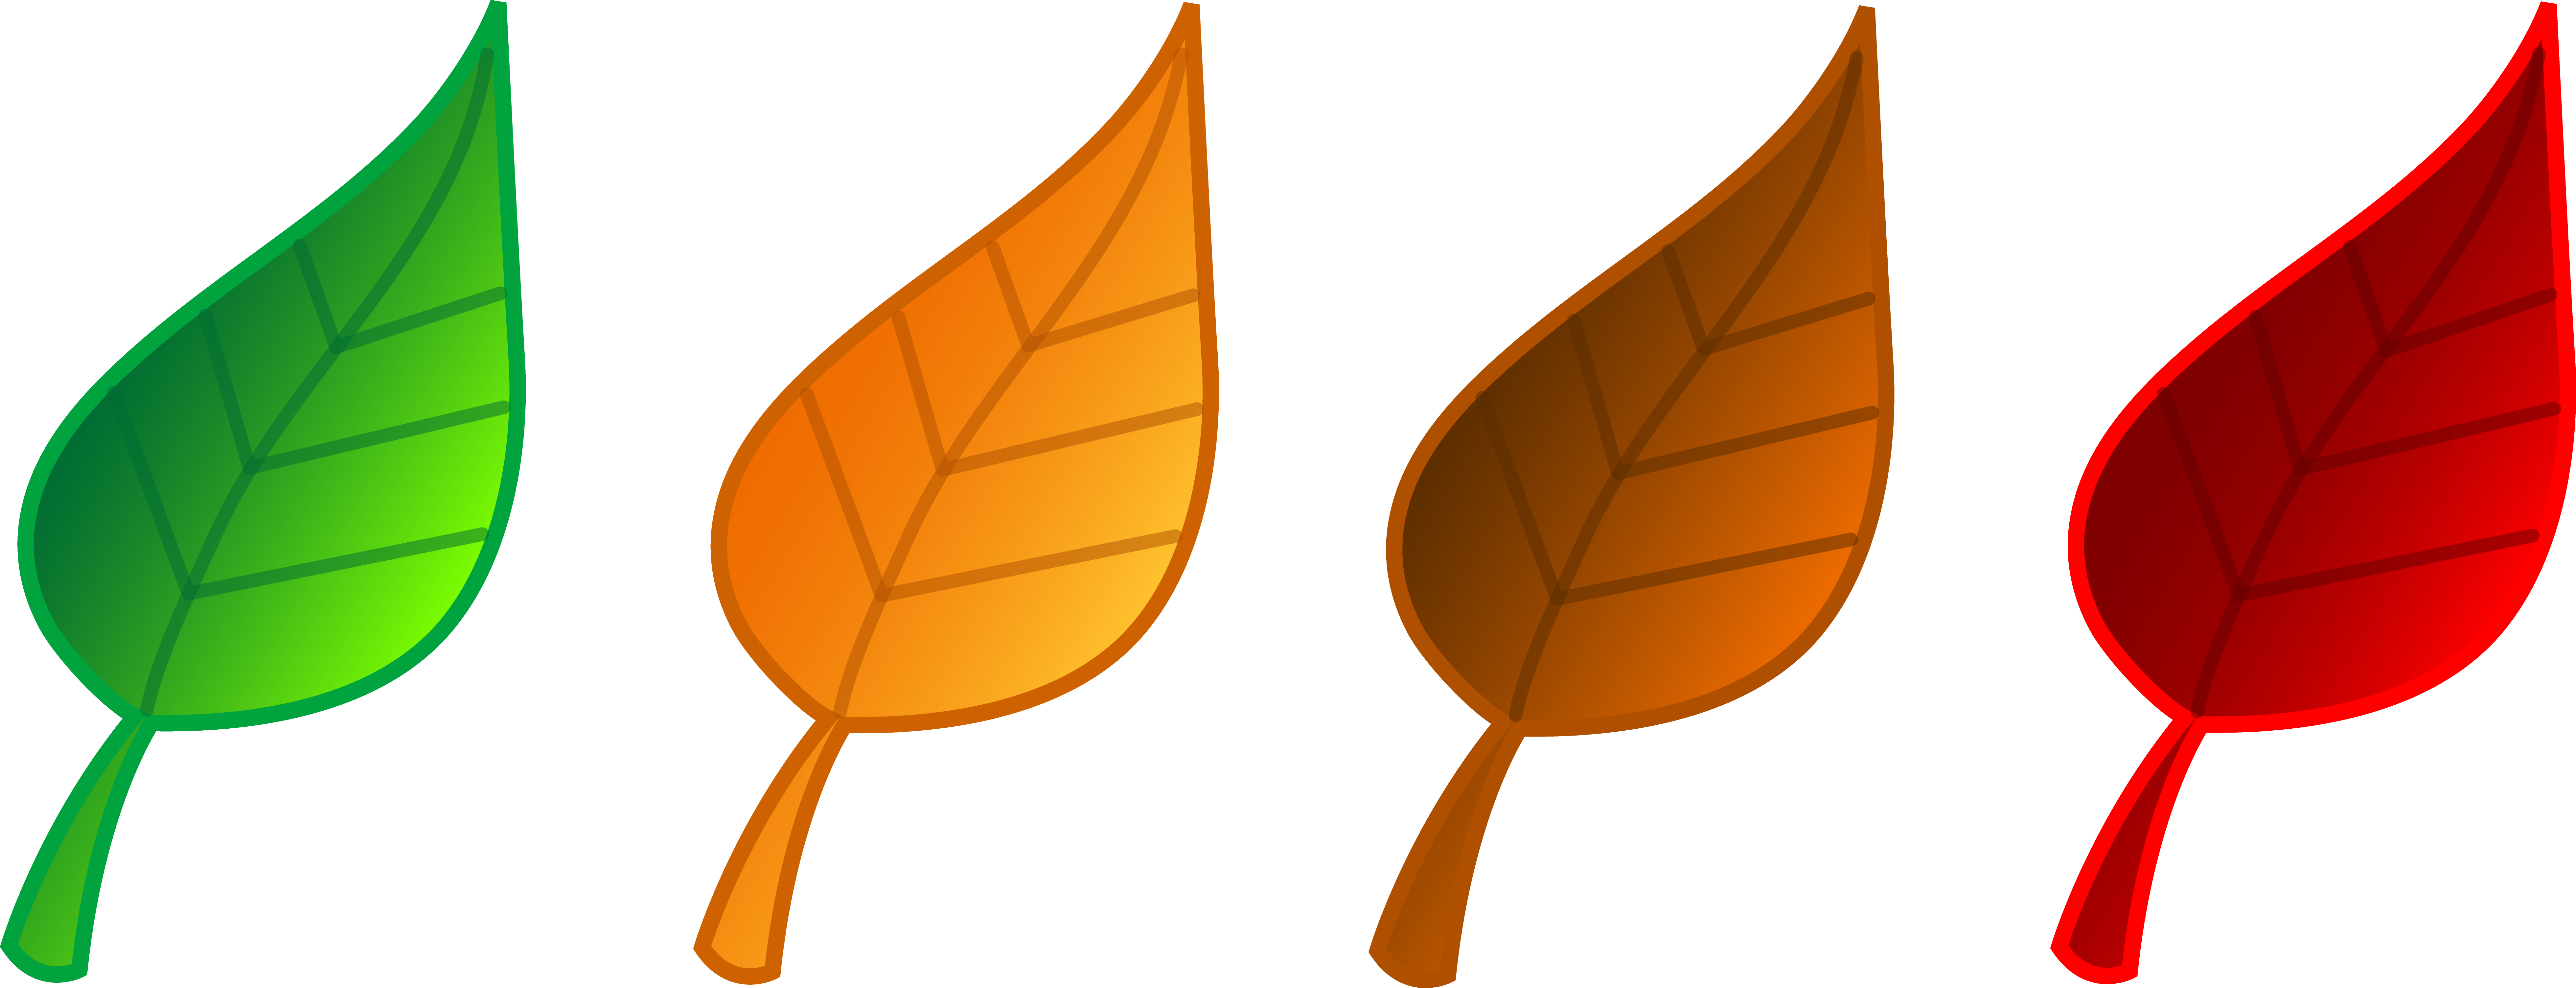 Free Fall Leaves Clip Art, Download Free Clip Art, Free ...